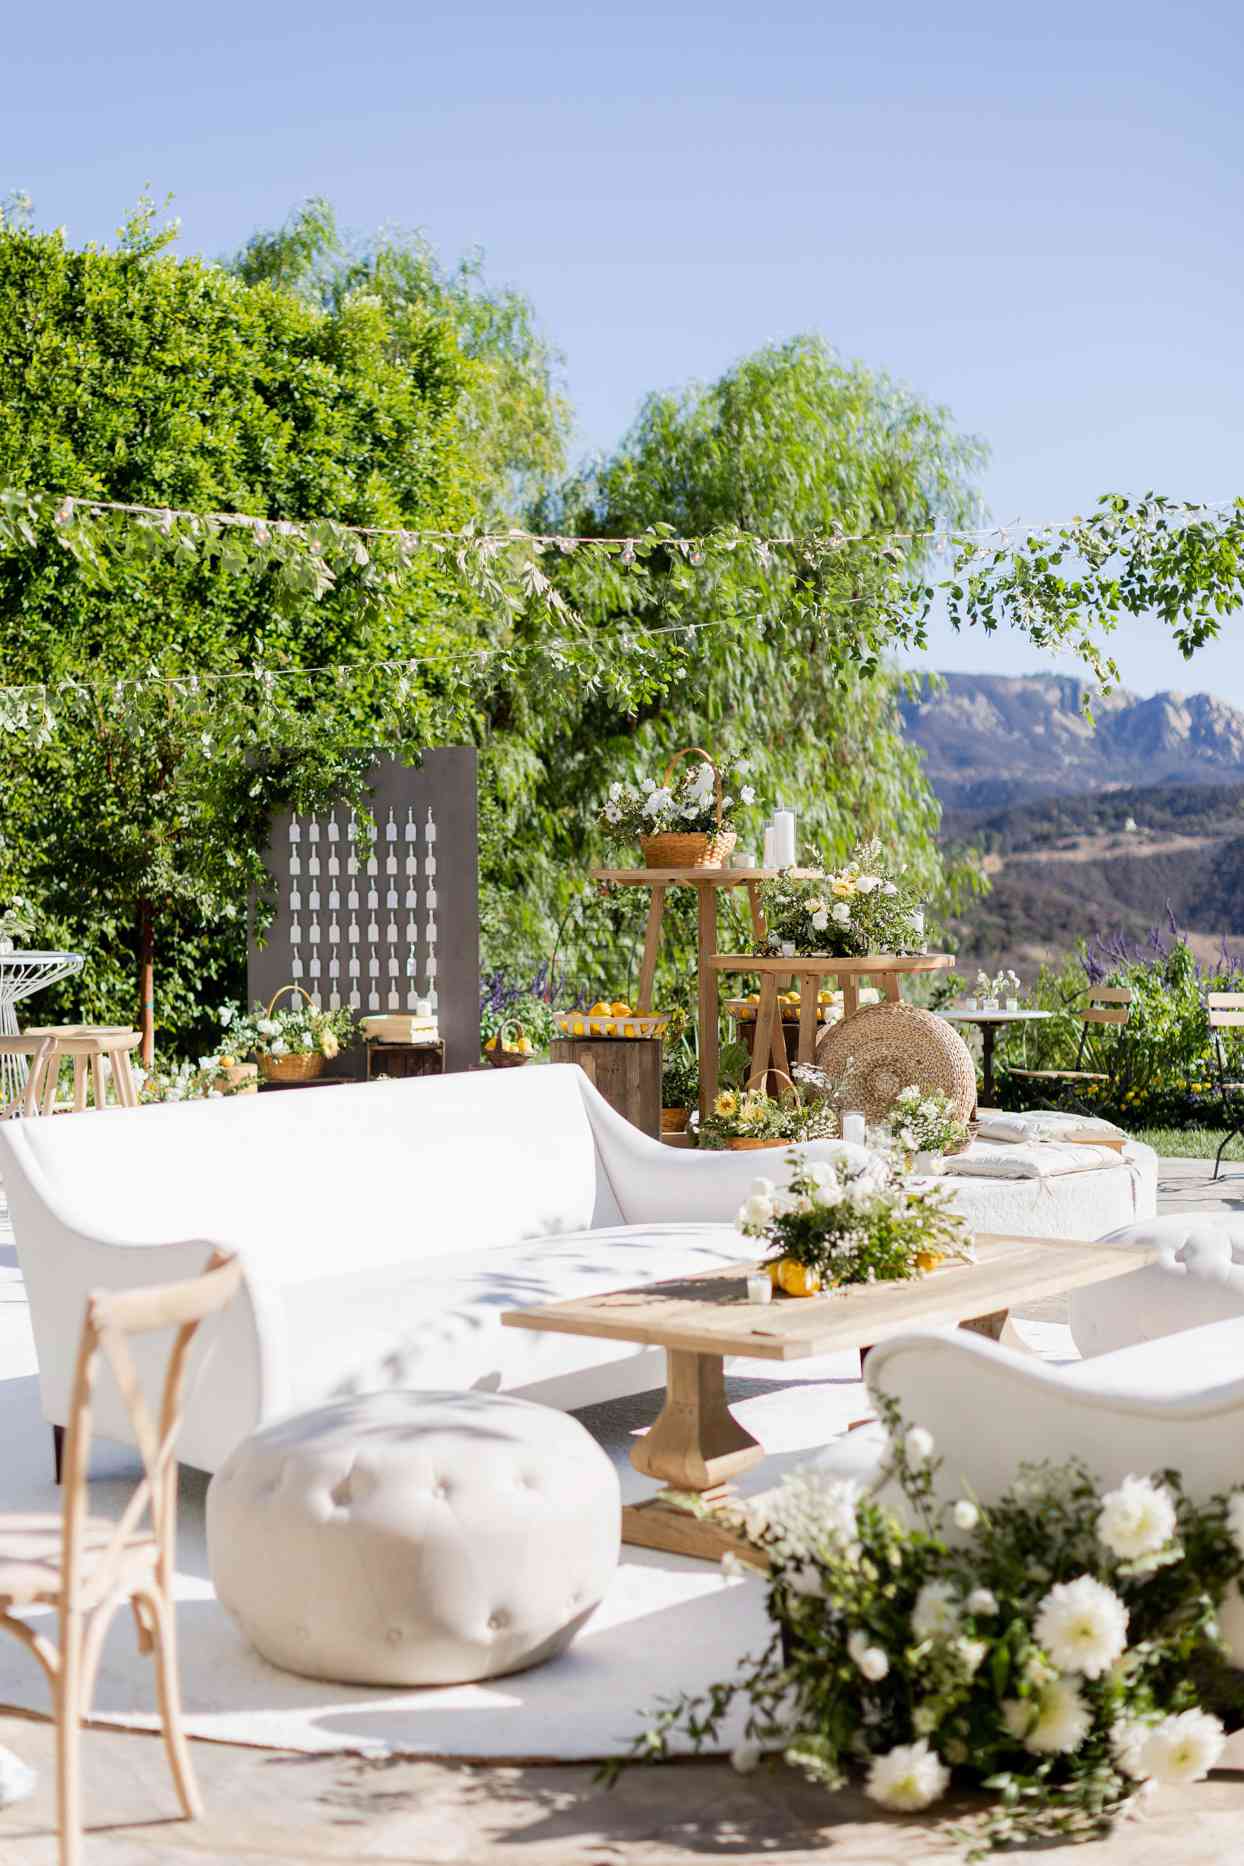 engagement party with white outdoor furniture overlooking mountains